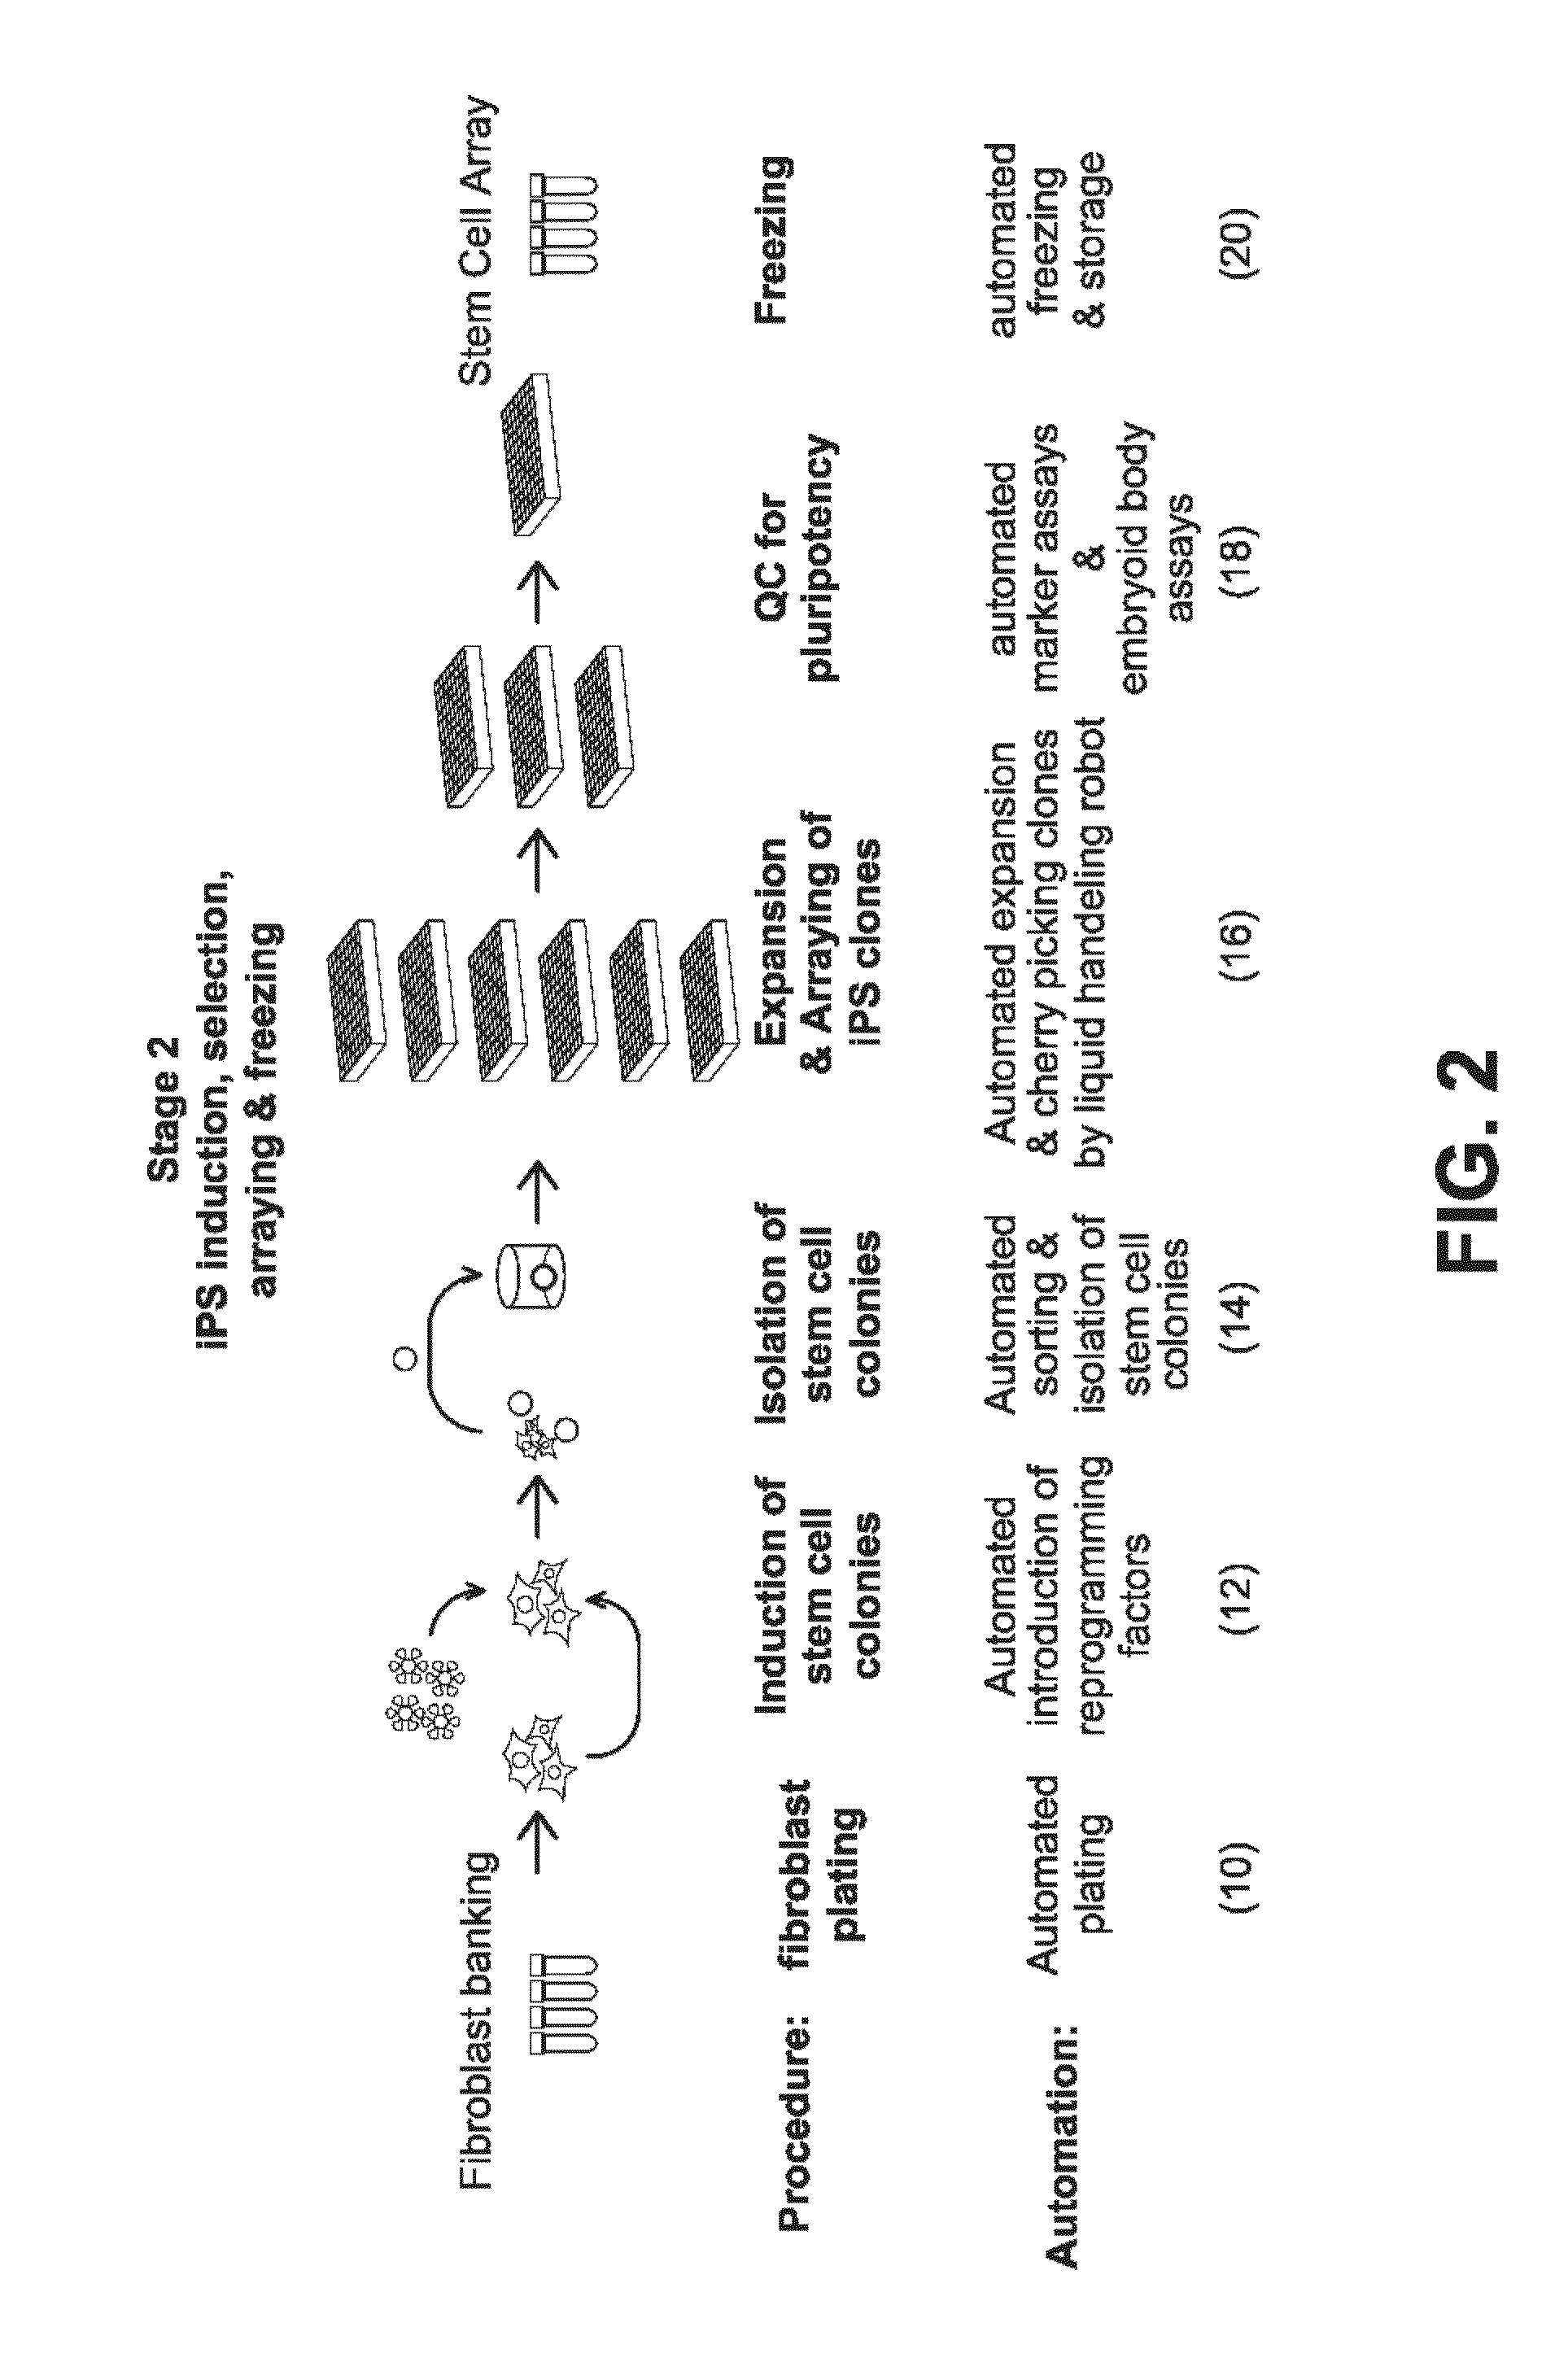 Systems and methods for producing stem cells and differentiated cells